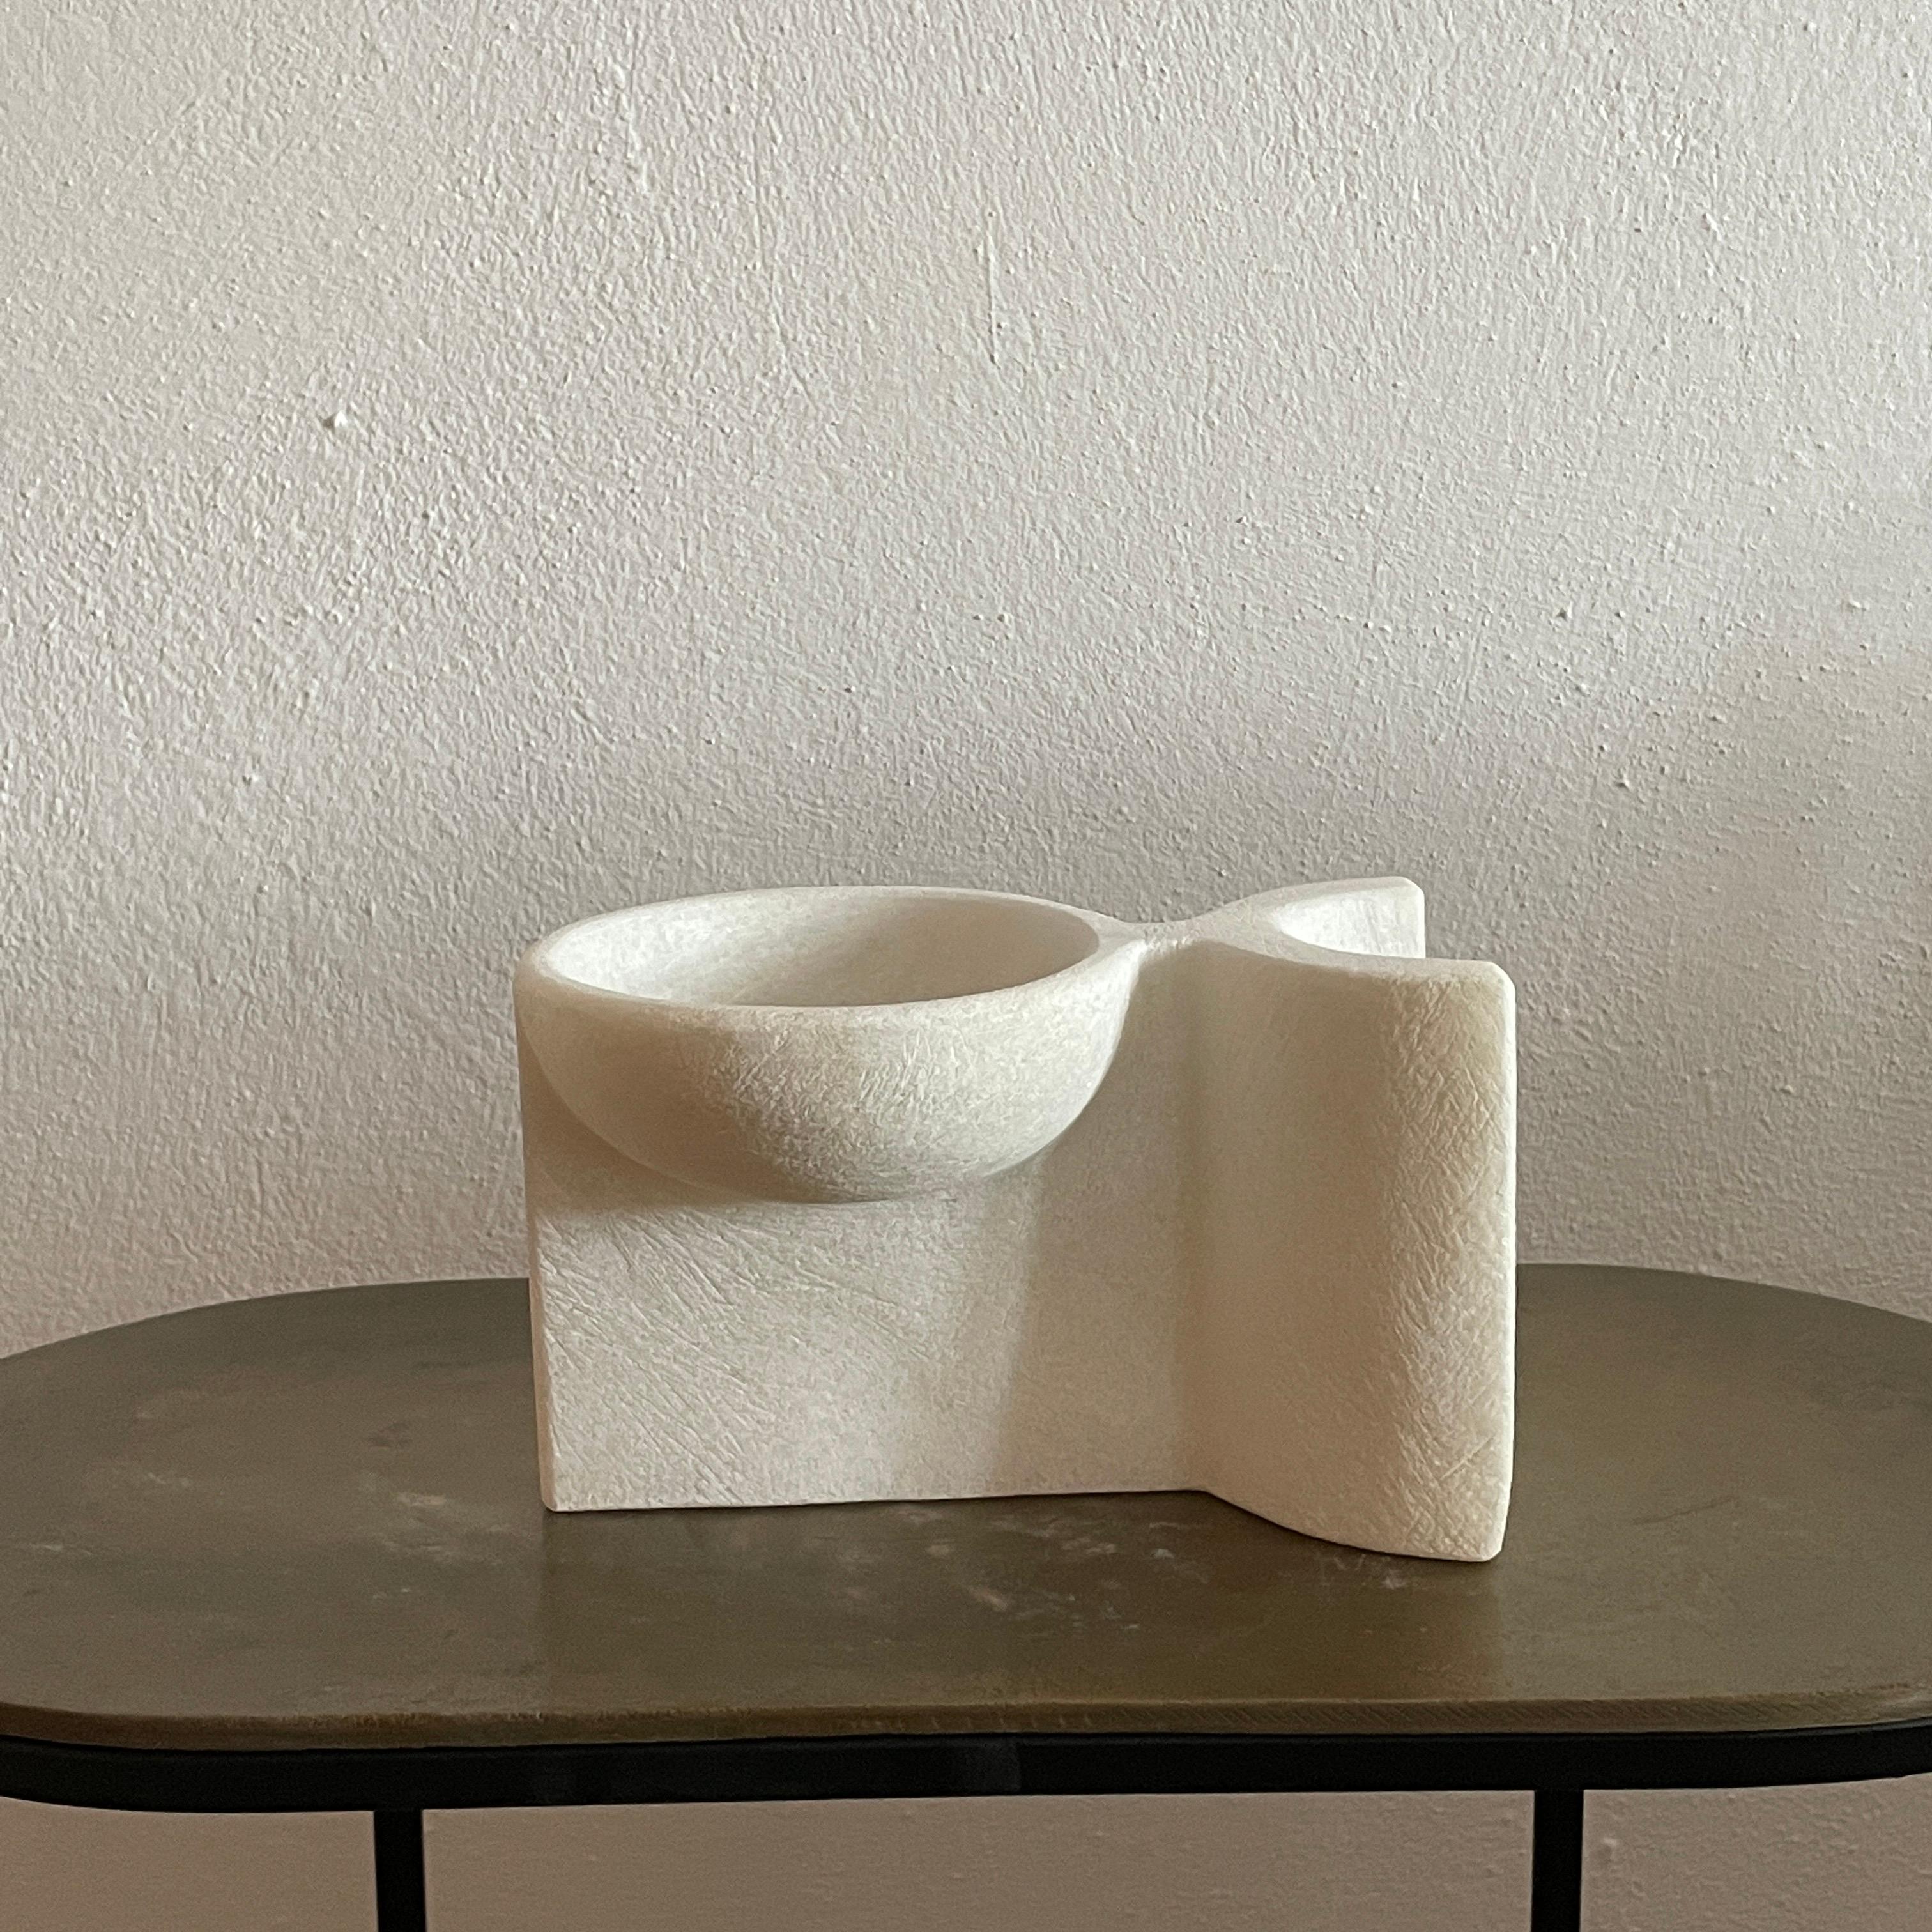 Hand carved marble vessel by Tom Von Kaenel
Materials: Marble
Dimensions: W13 x D20 x H12 cm

Tom von Kaenel, sculptor and painter, was born in Switzerland in 1961. Already in his early
childhood he was deeply devoted to art. His desire to